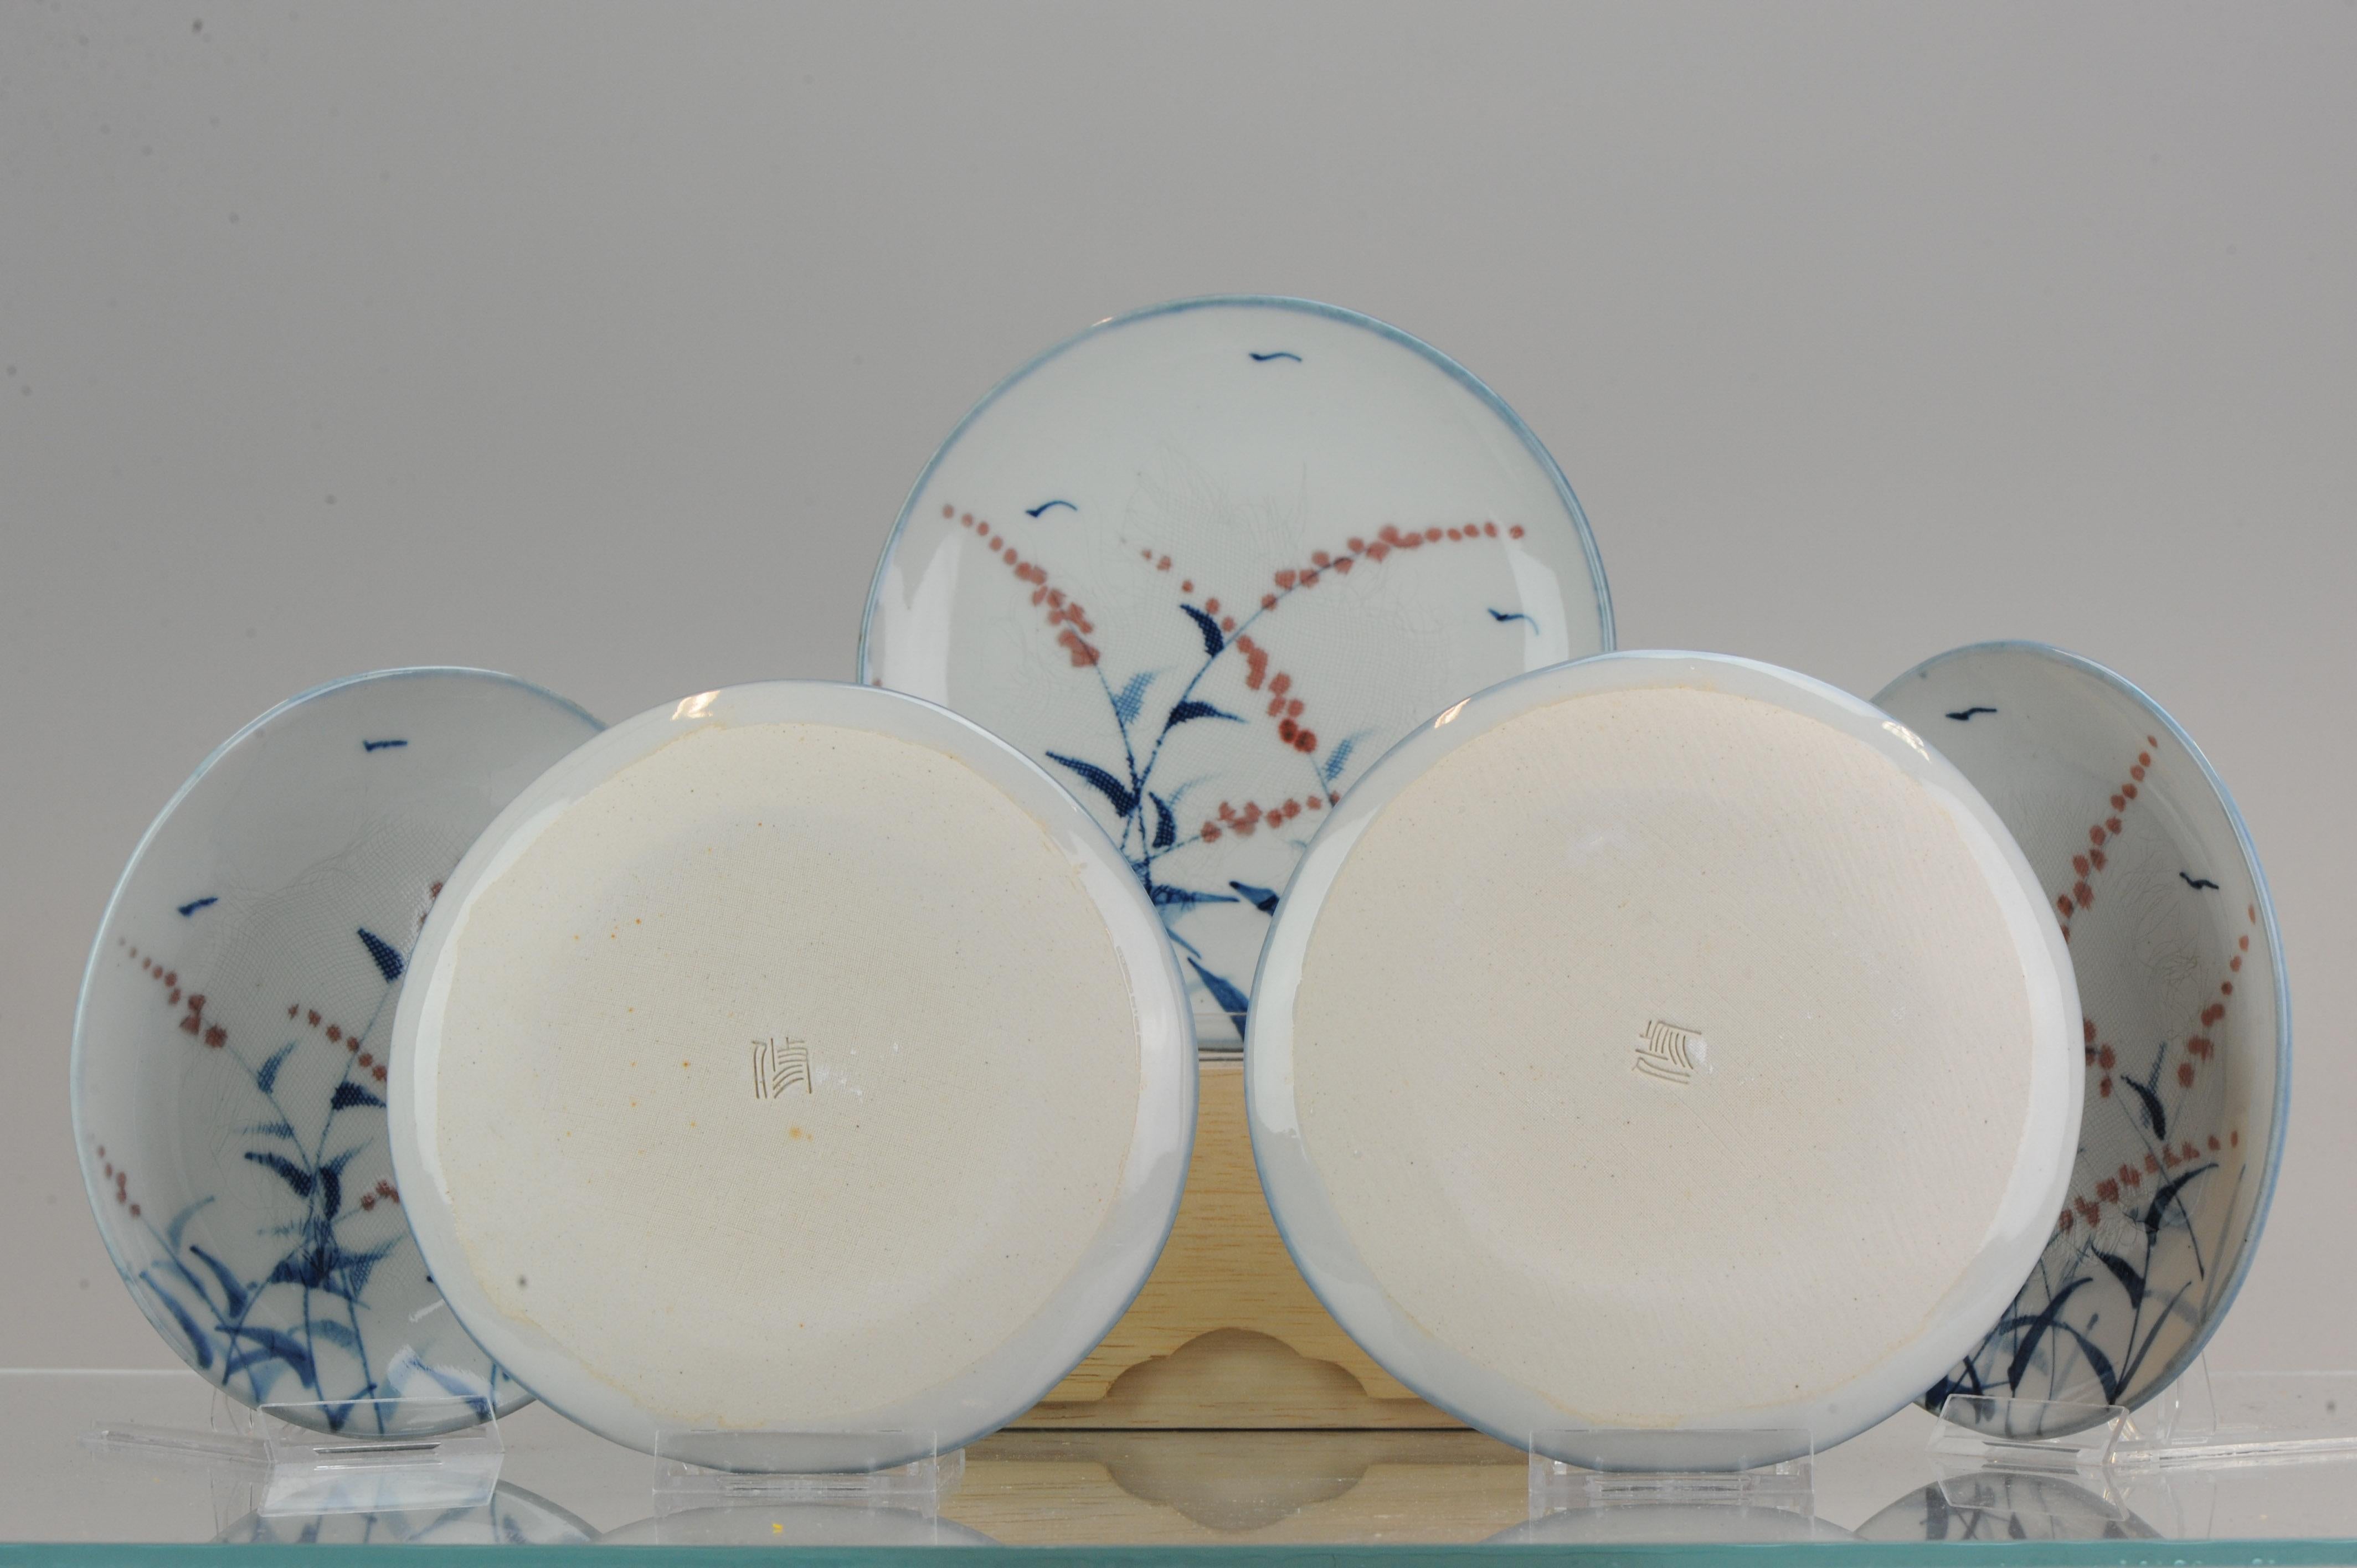 A very nicely decorated set of Japanese Porcelain dishes

Additional information:
Material: Porcelain & Pottery
Region of Origin: Japan
Period: 19th century, 20th century
Condition: Perfect
Dimension: Ø 17.5-18 x 2 H cm